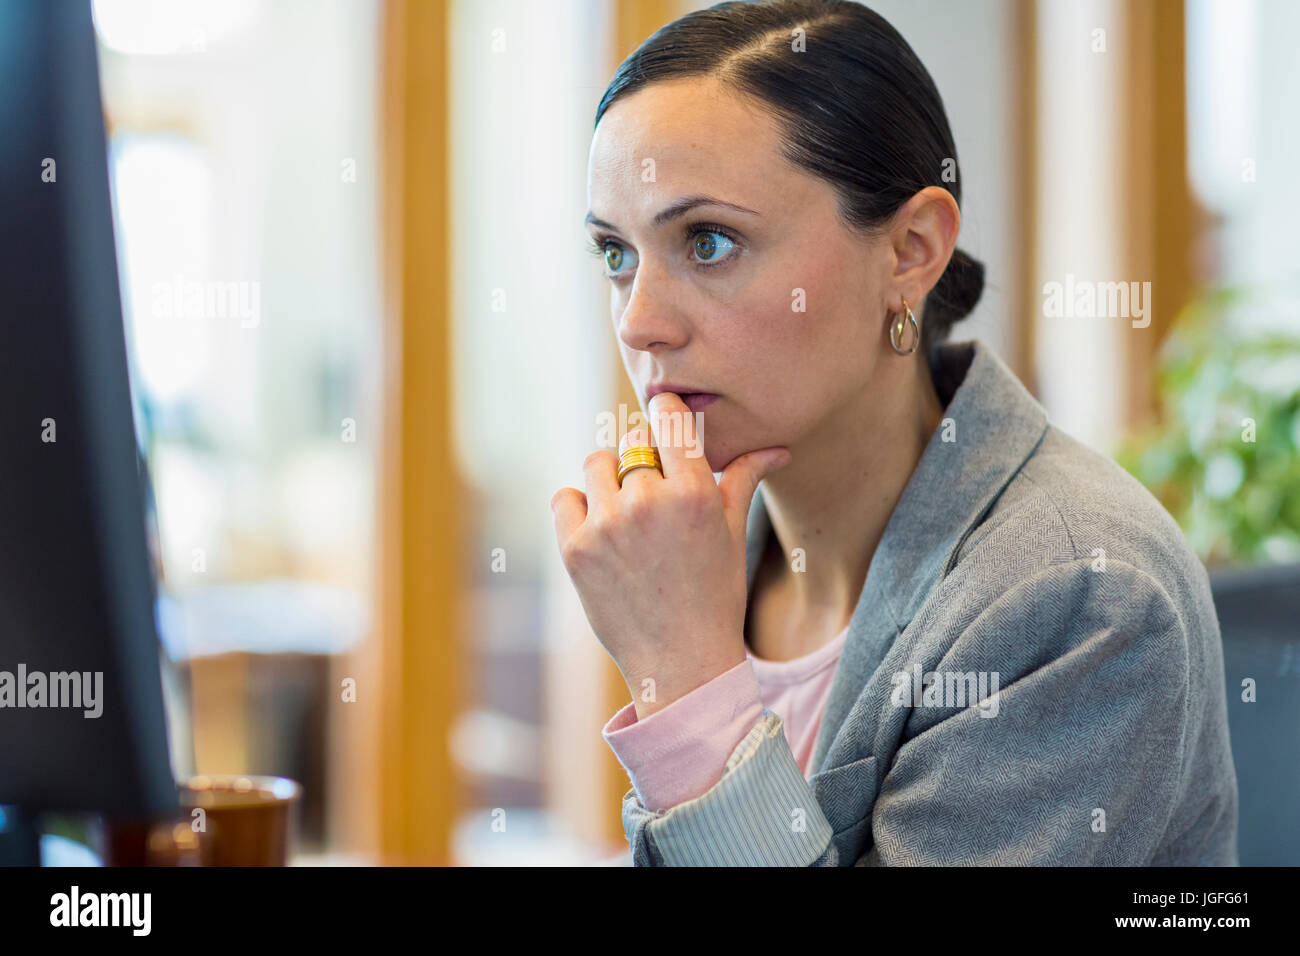 Caucasian businesswoman staring at computer in office Stock Photo